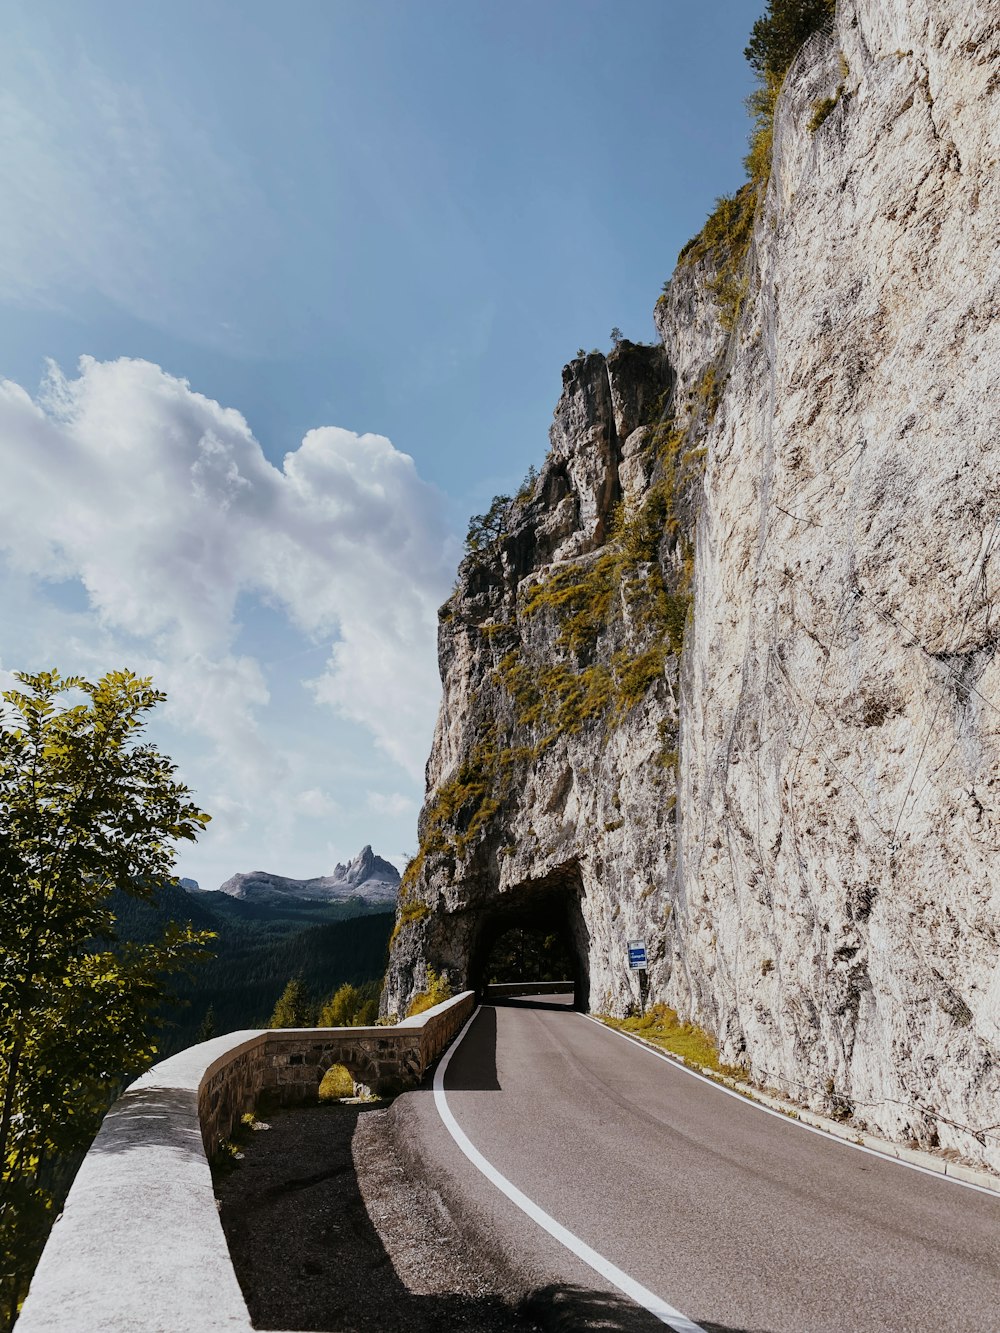 a road going into a tunnel in the side of a mountain